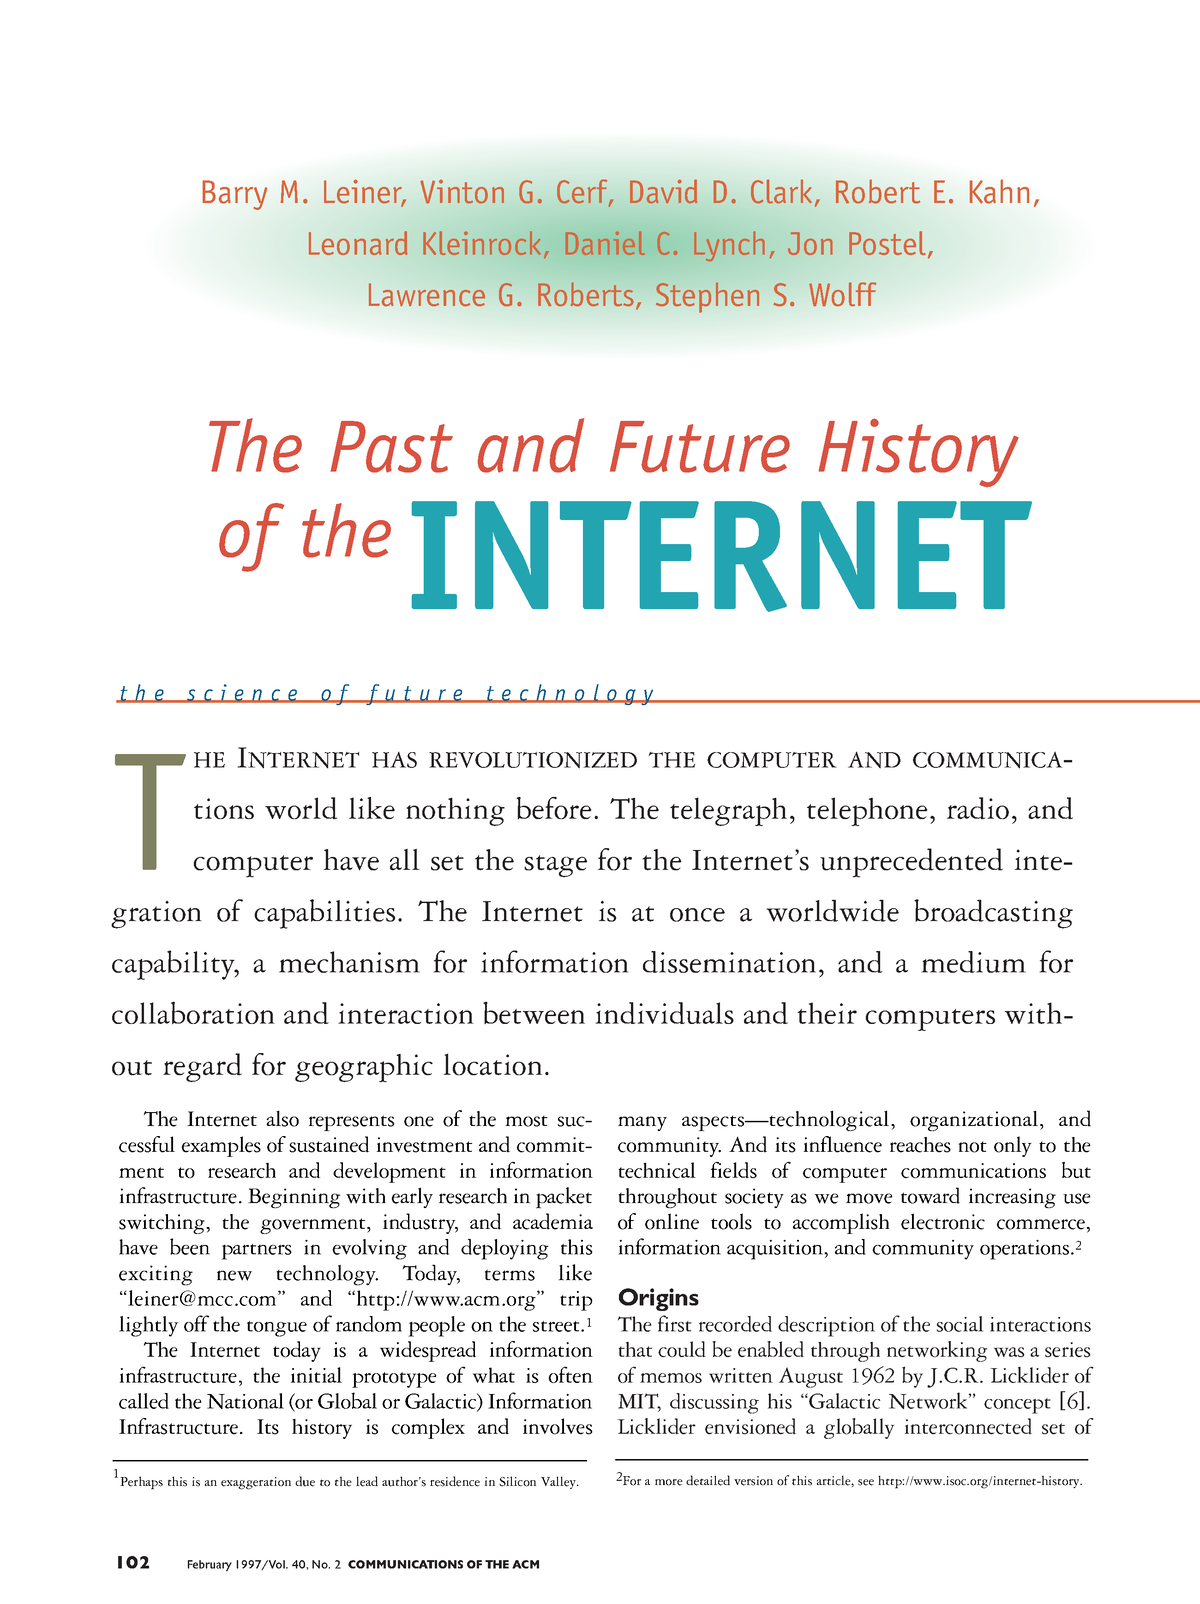 history of the internet assignment quizlet